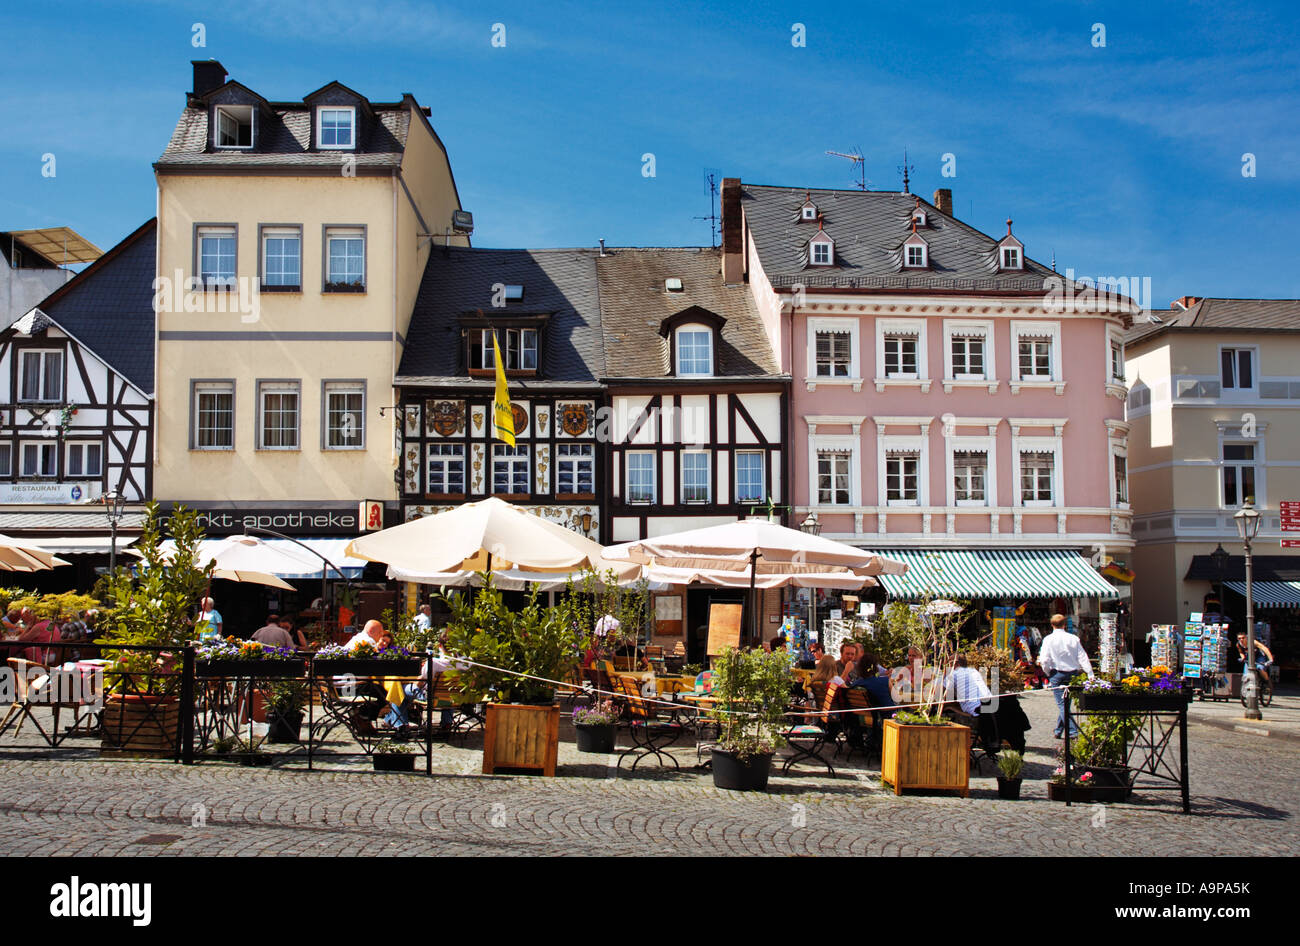 Germany, Rhineland - Half timbered houses, cafes and shops in the Market square at Boppard on the River Rhine, Rhine Valley, Germany Stock Photo